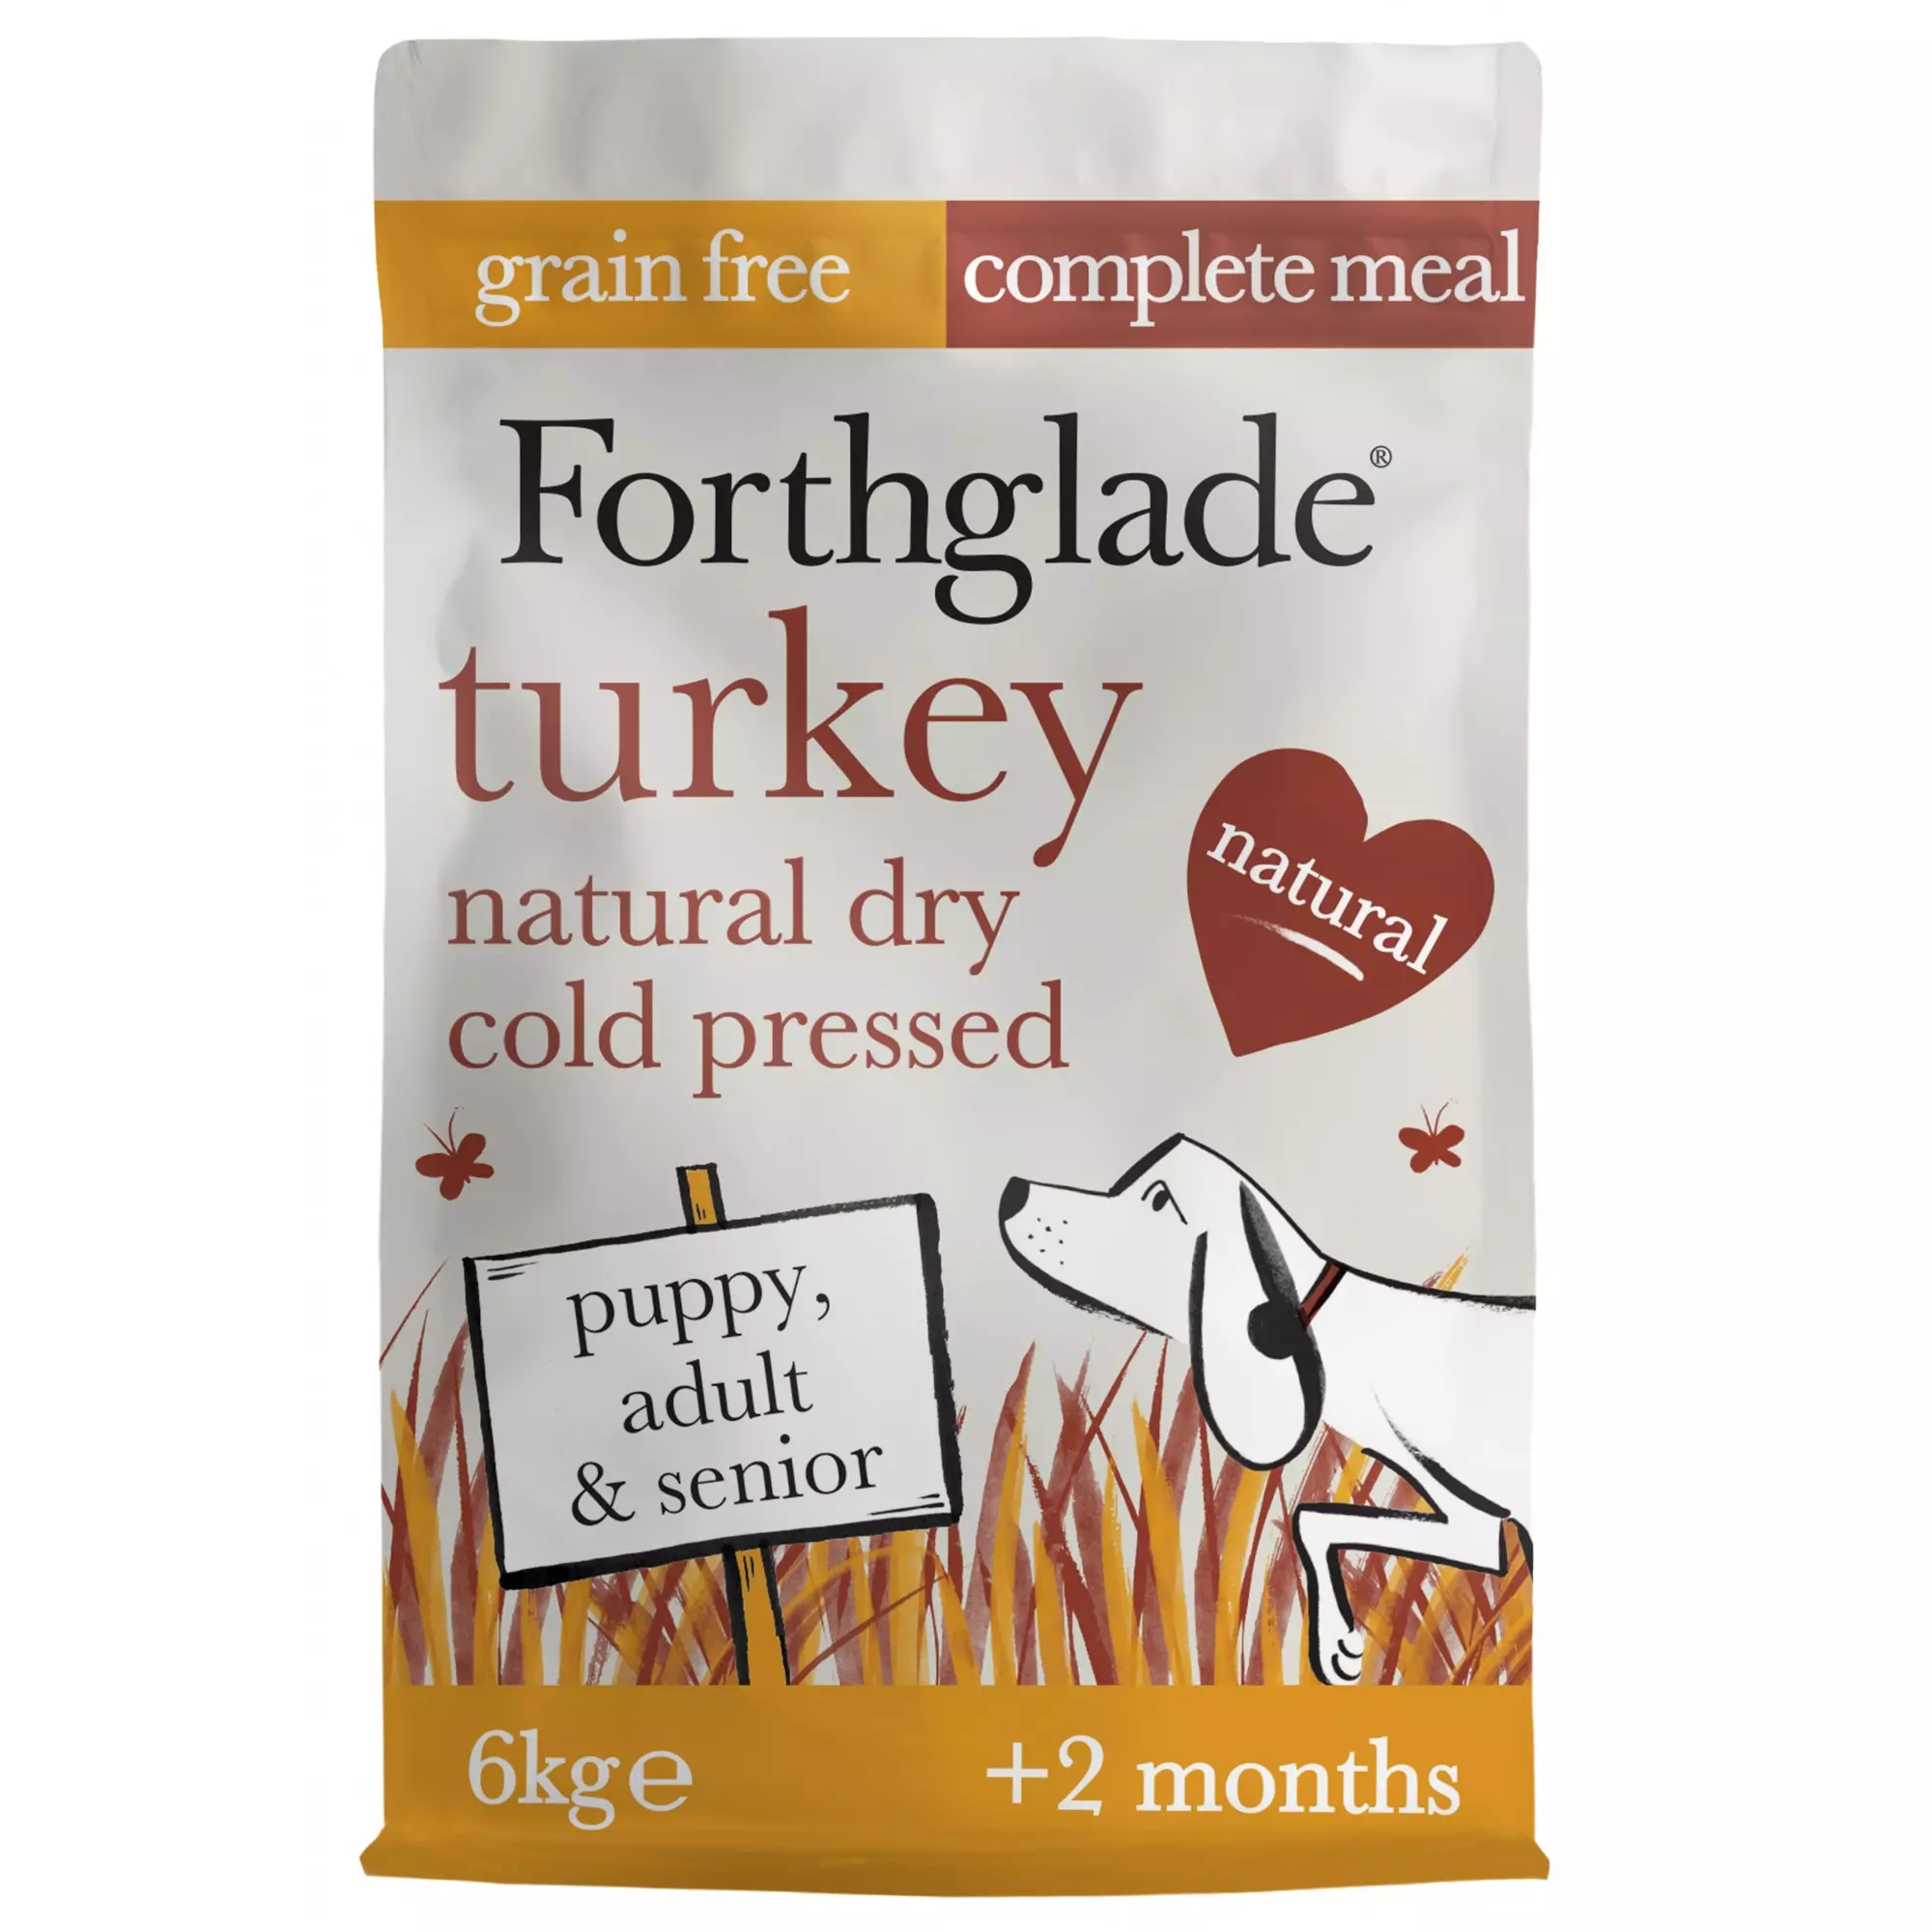 Forthglade Turkey Natural Dry Cold Pressed Grain Free Dry Dog Food